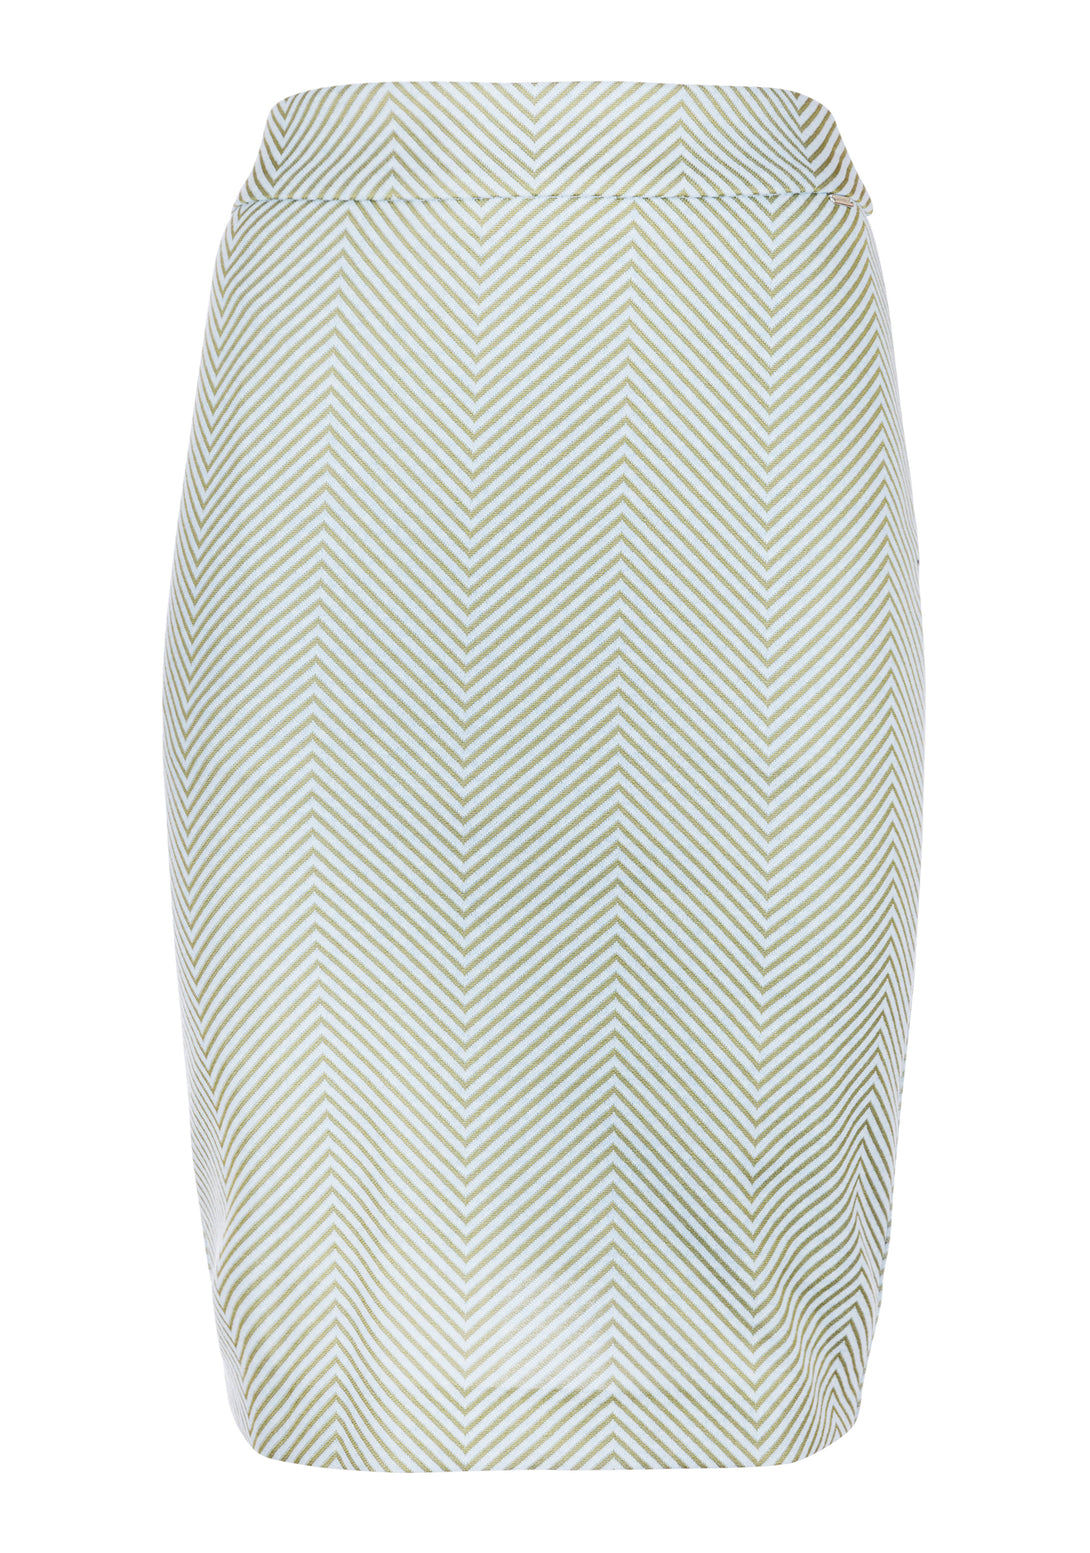 Sheath dress regular fit, middle length, with geometric pattern